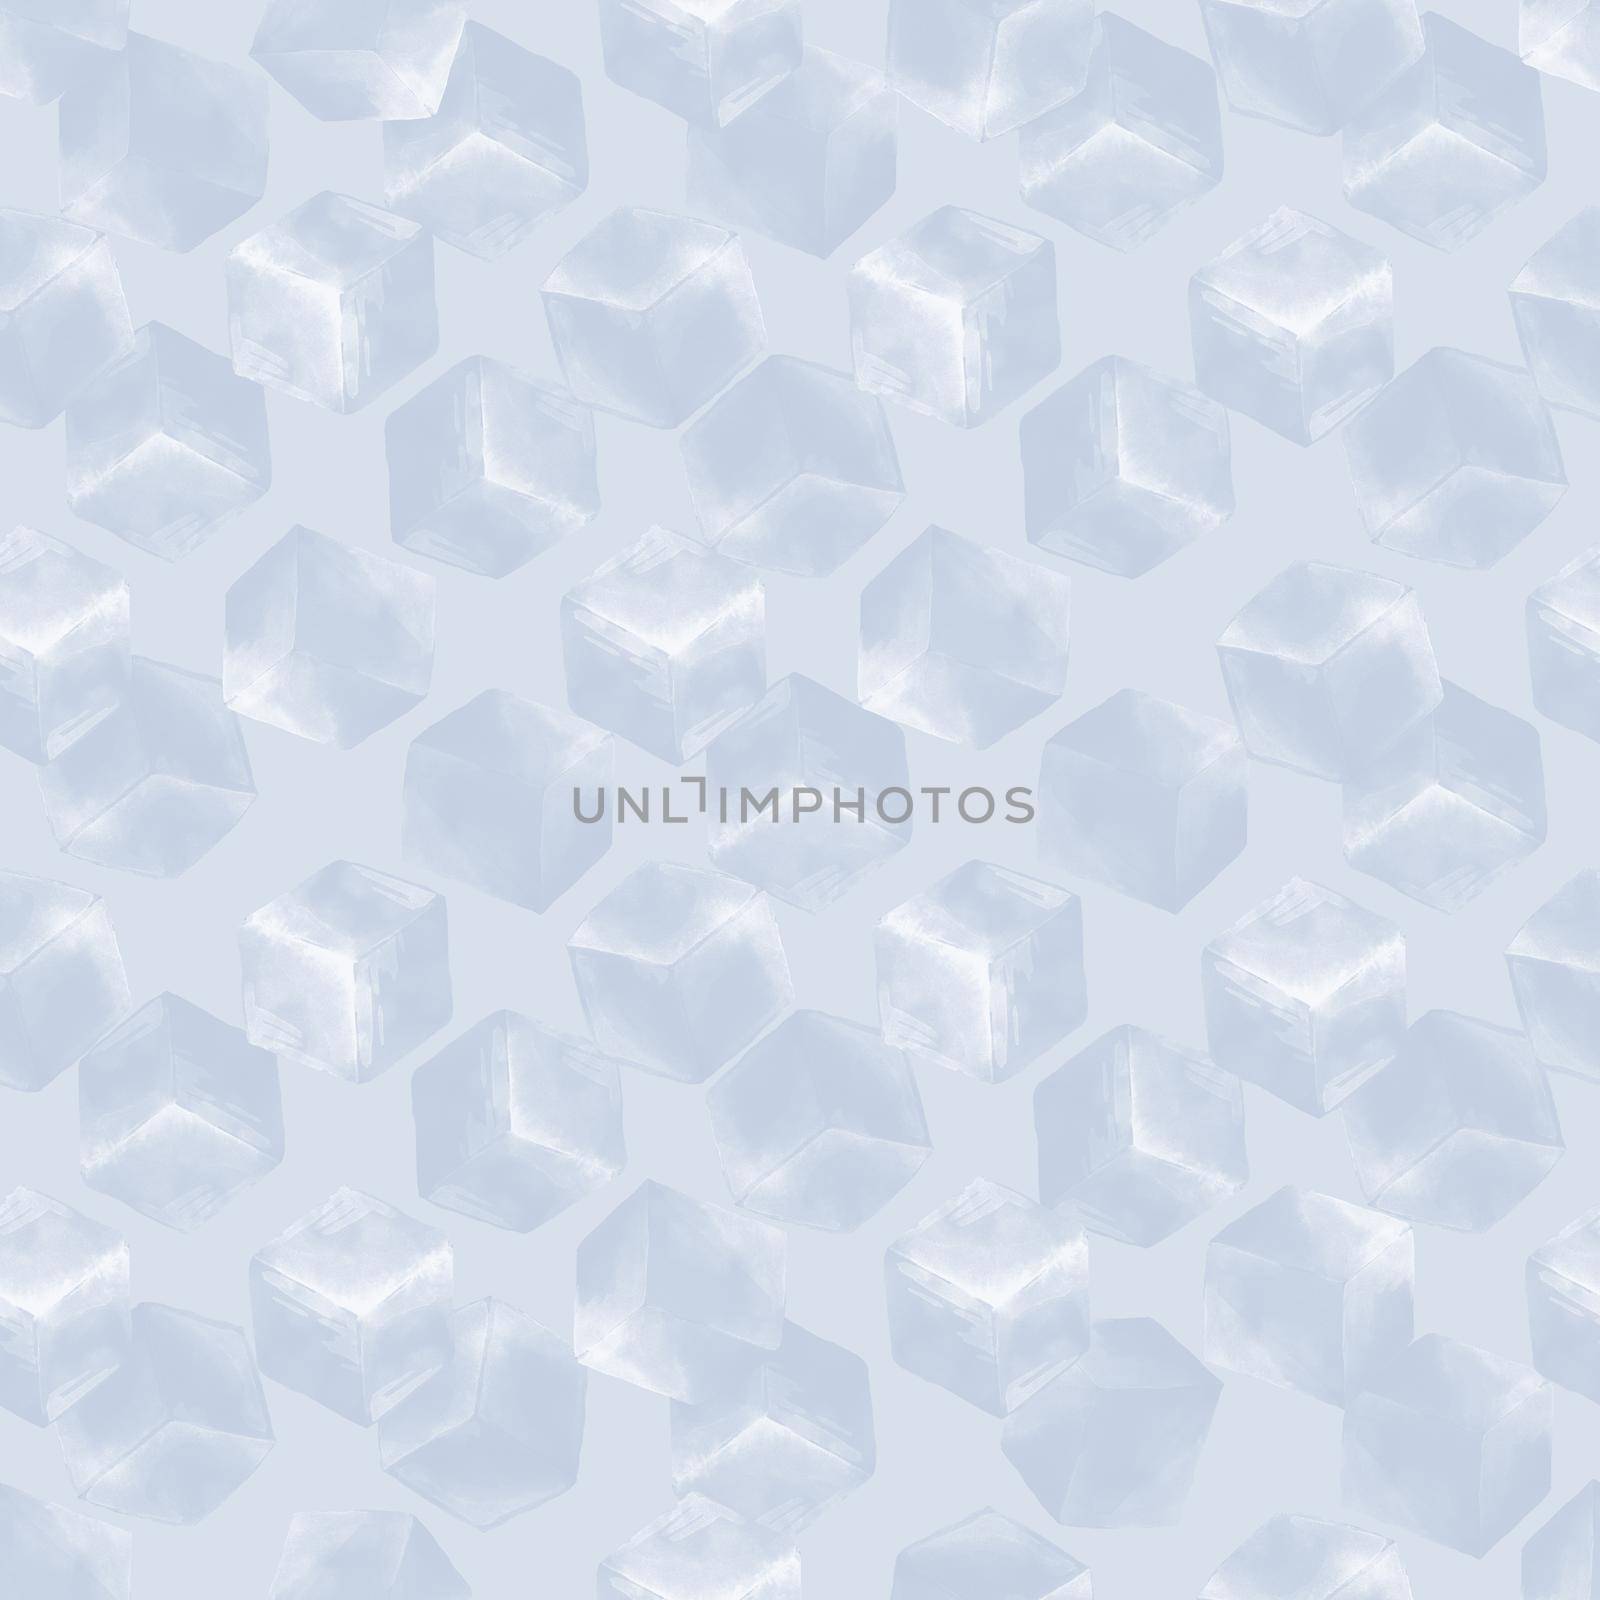 Seamless pattern with ice cubes. Stylized watercolor illustration.